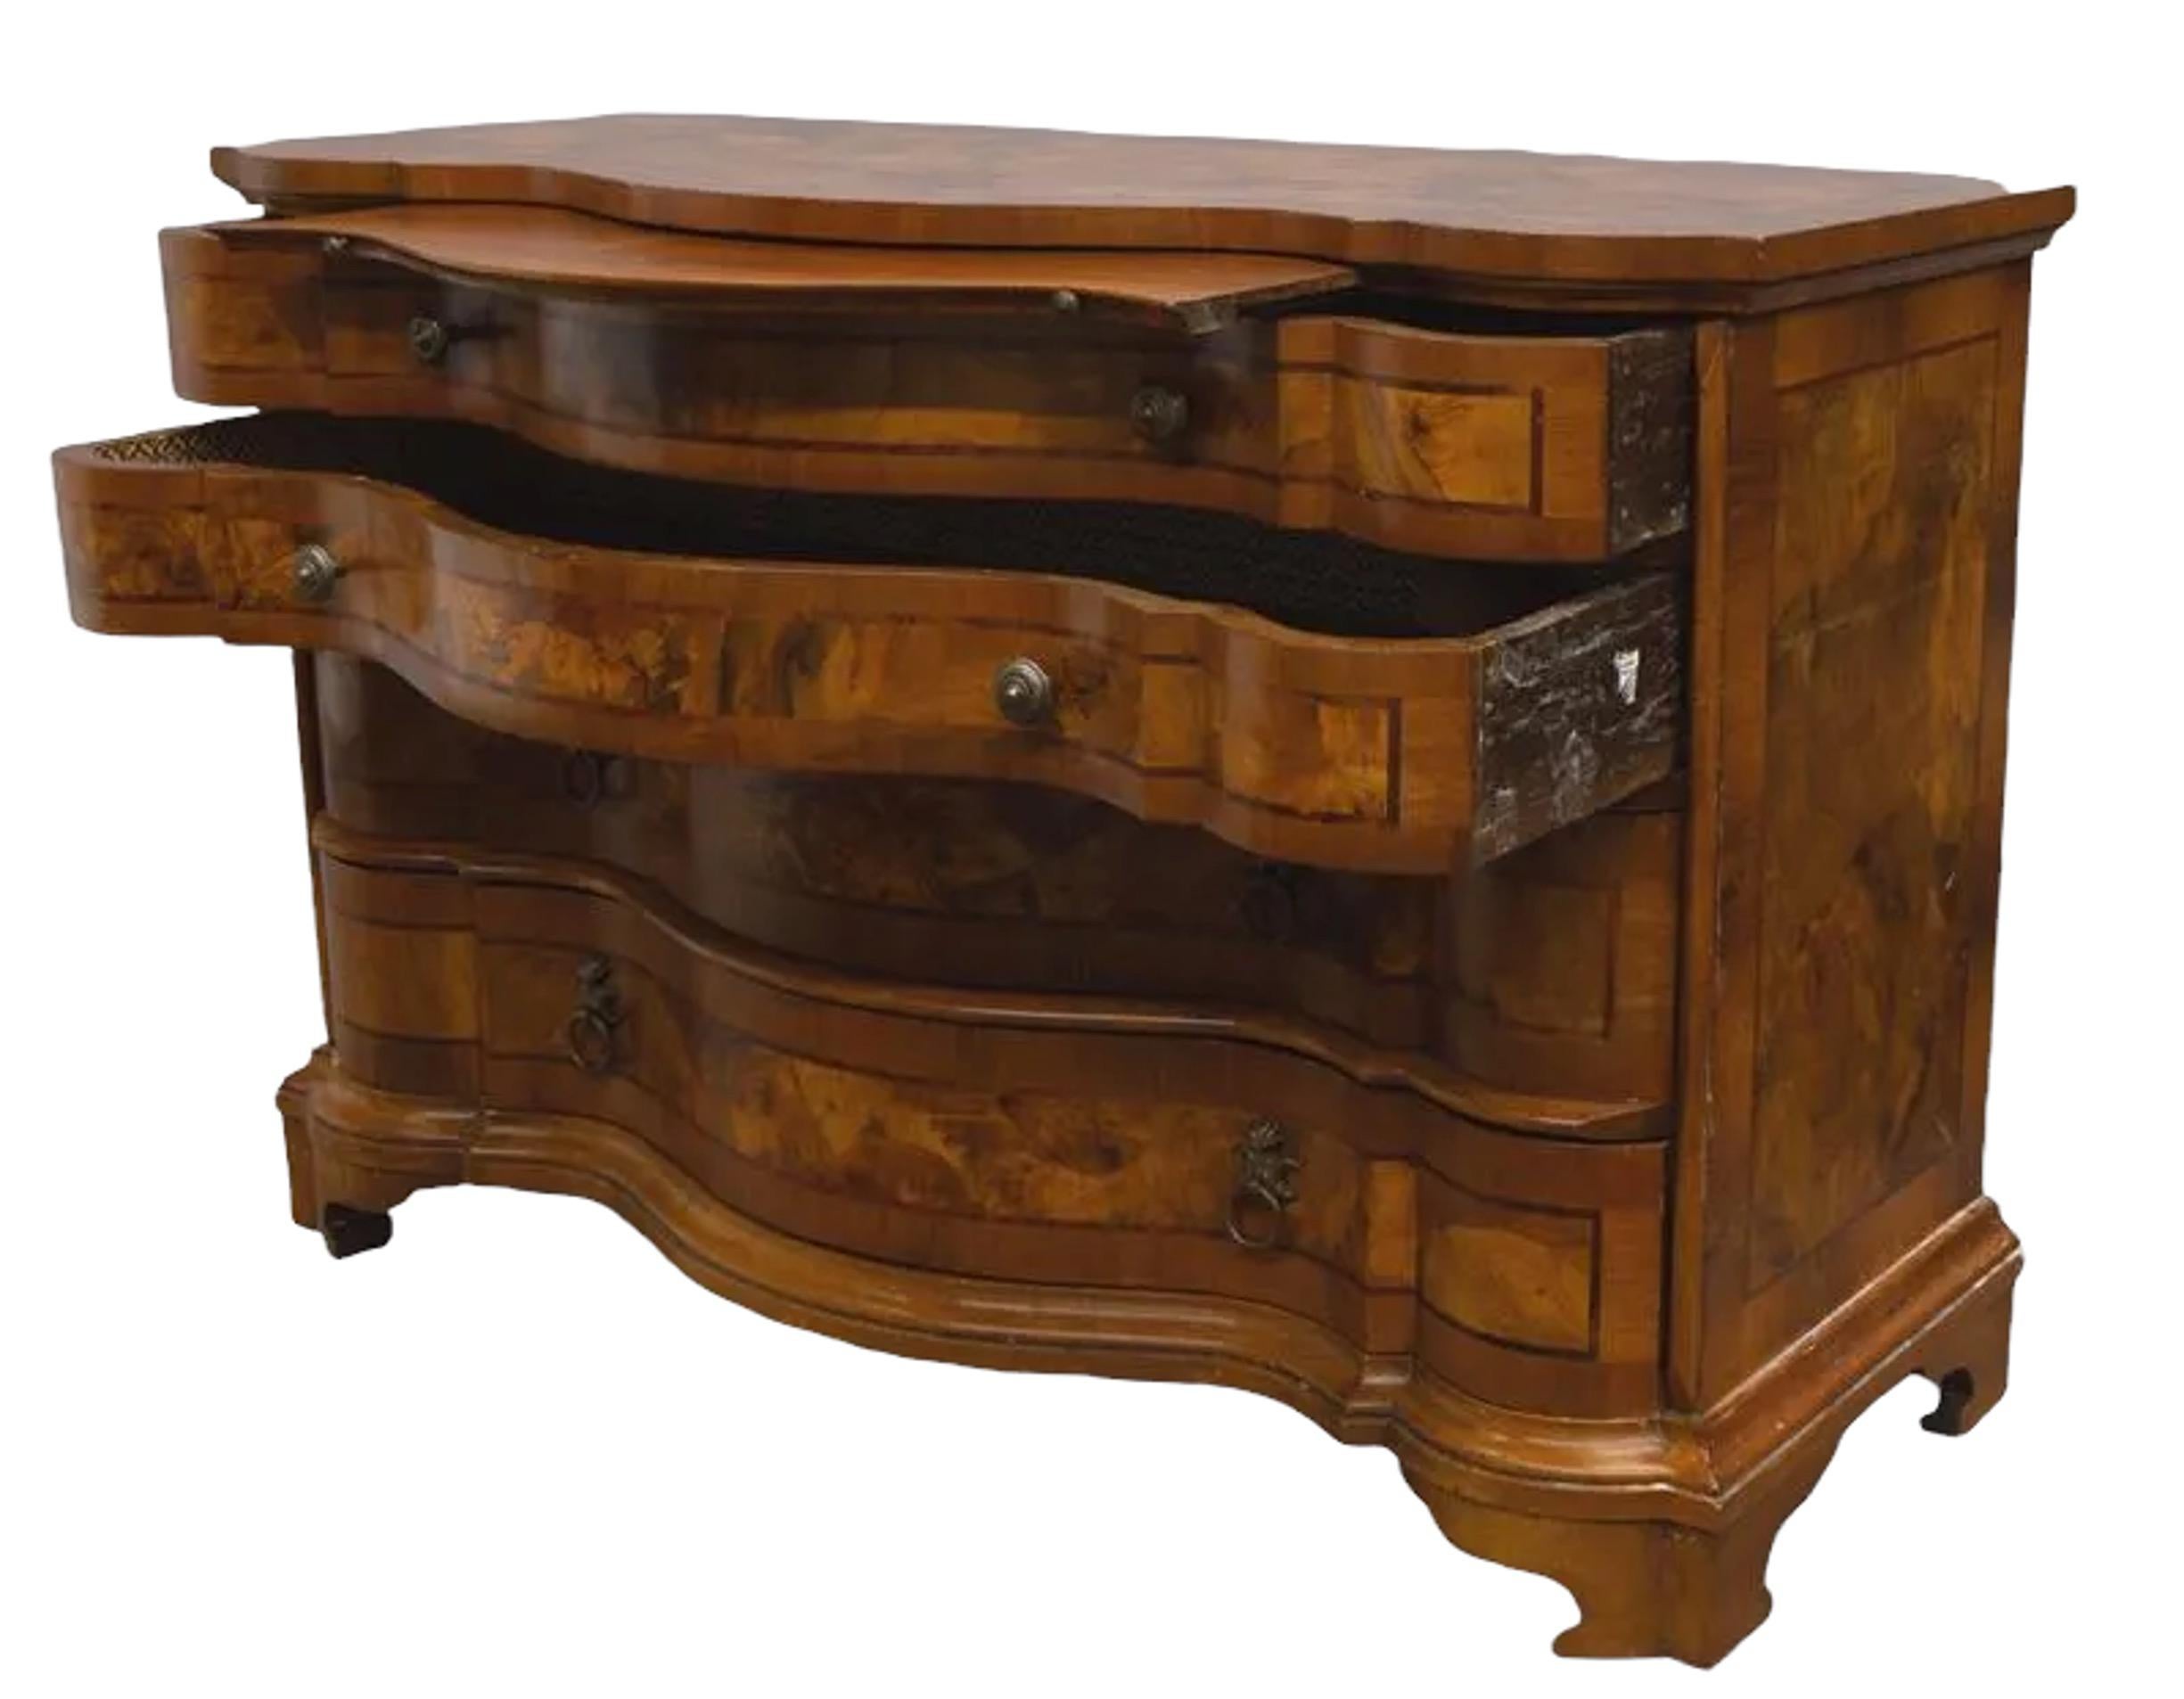 Circa 1750s German Oxbow Shaped Walnut Commode In Distressed Condition For Sale In North Miami, FL